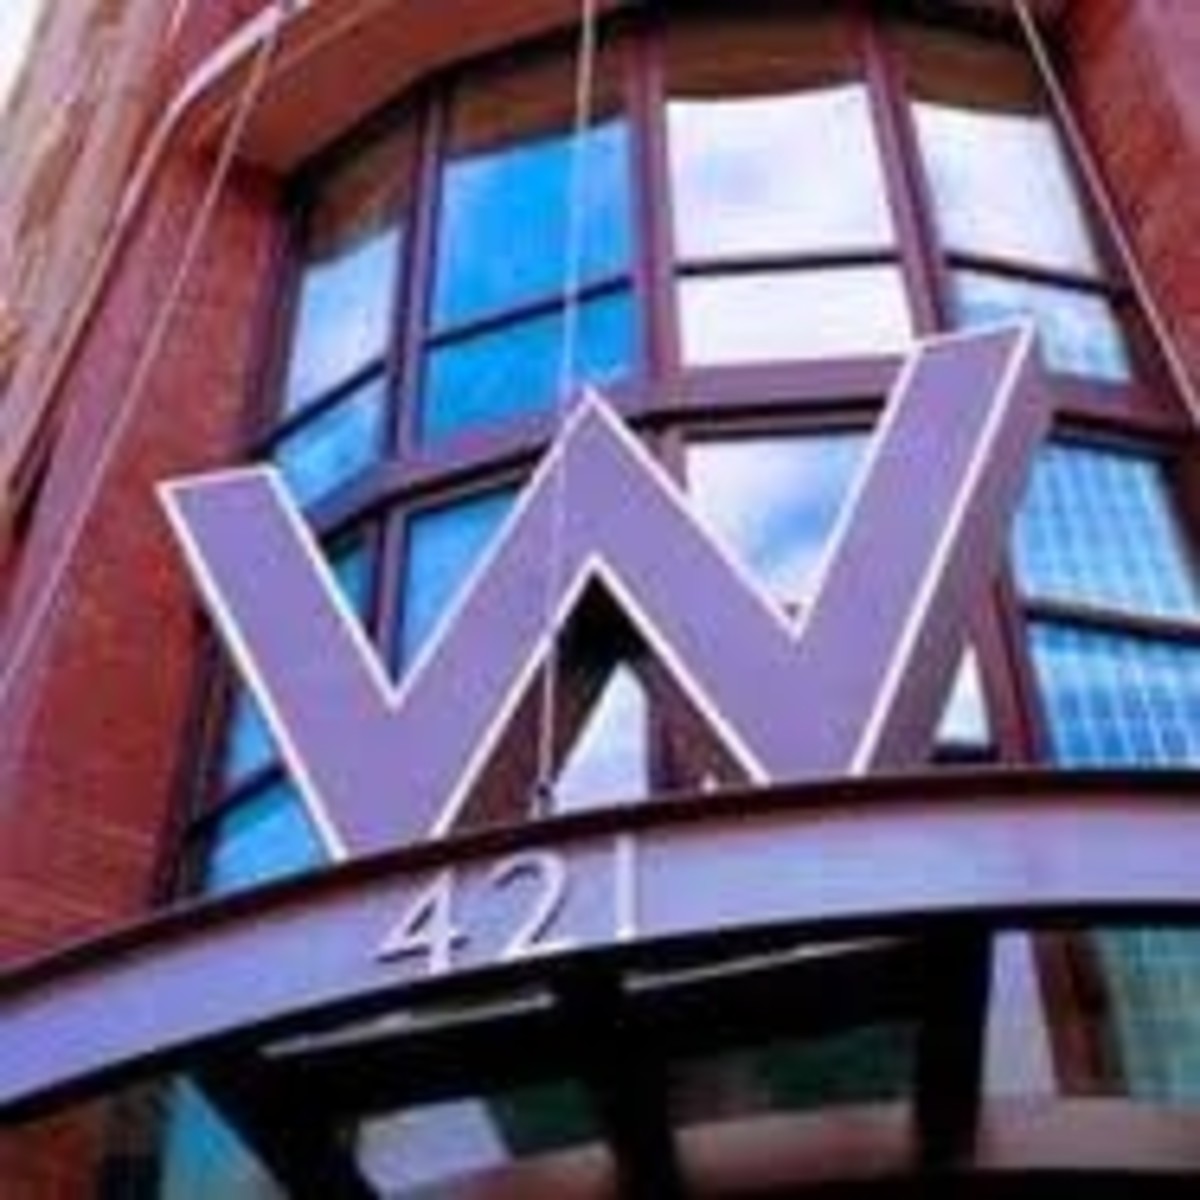 The "W" Hotel Marque in San Diego